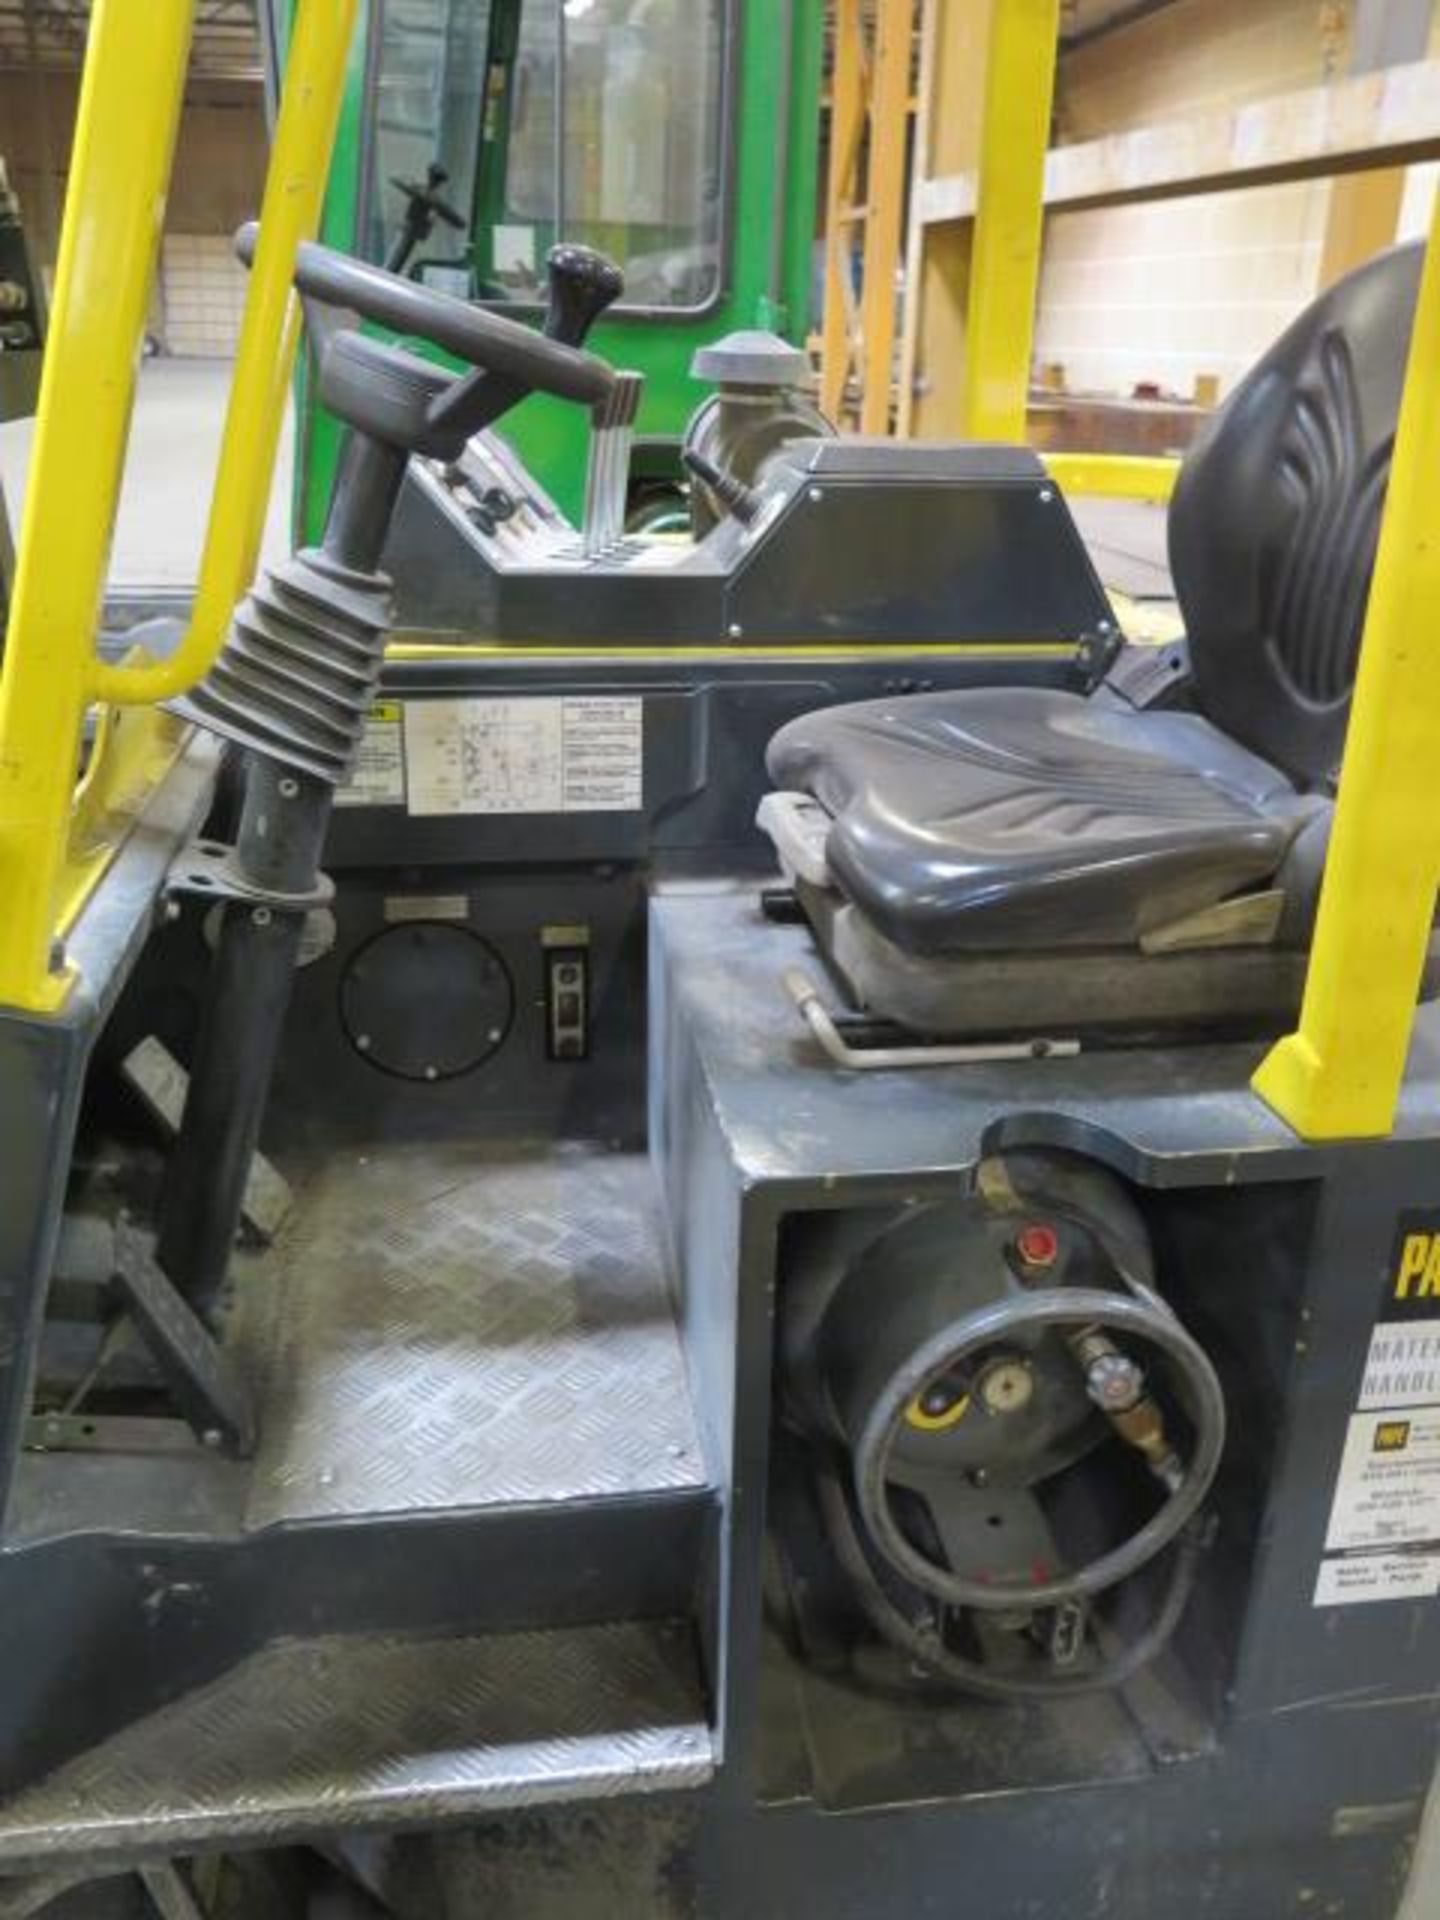 2017 CombiLift C6000CB 6,000 Lb Cap LPG Comb Forklift s/n 34957 w/ Multi-Directional, SOLD AS IS - Image 9 of 17